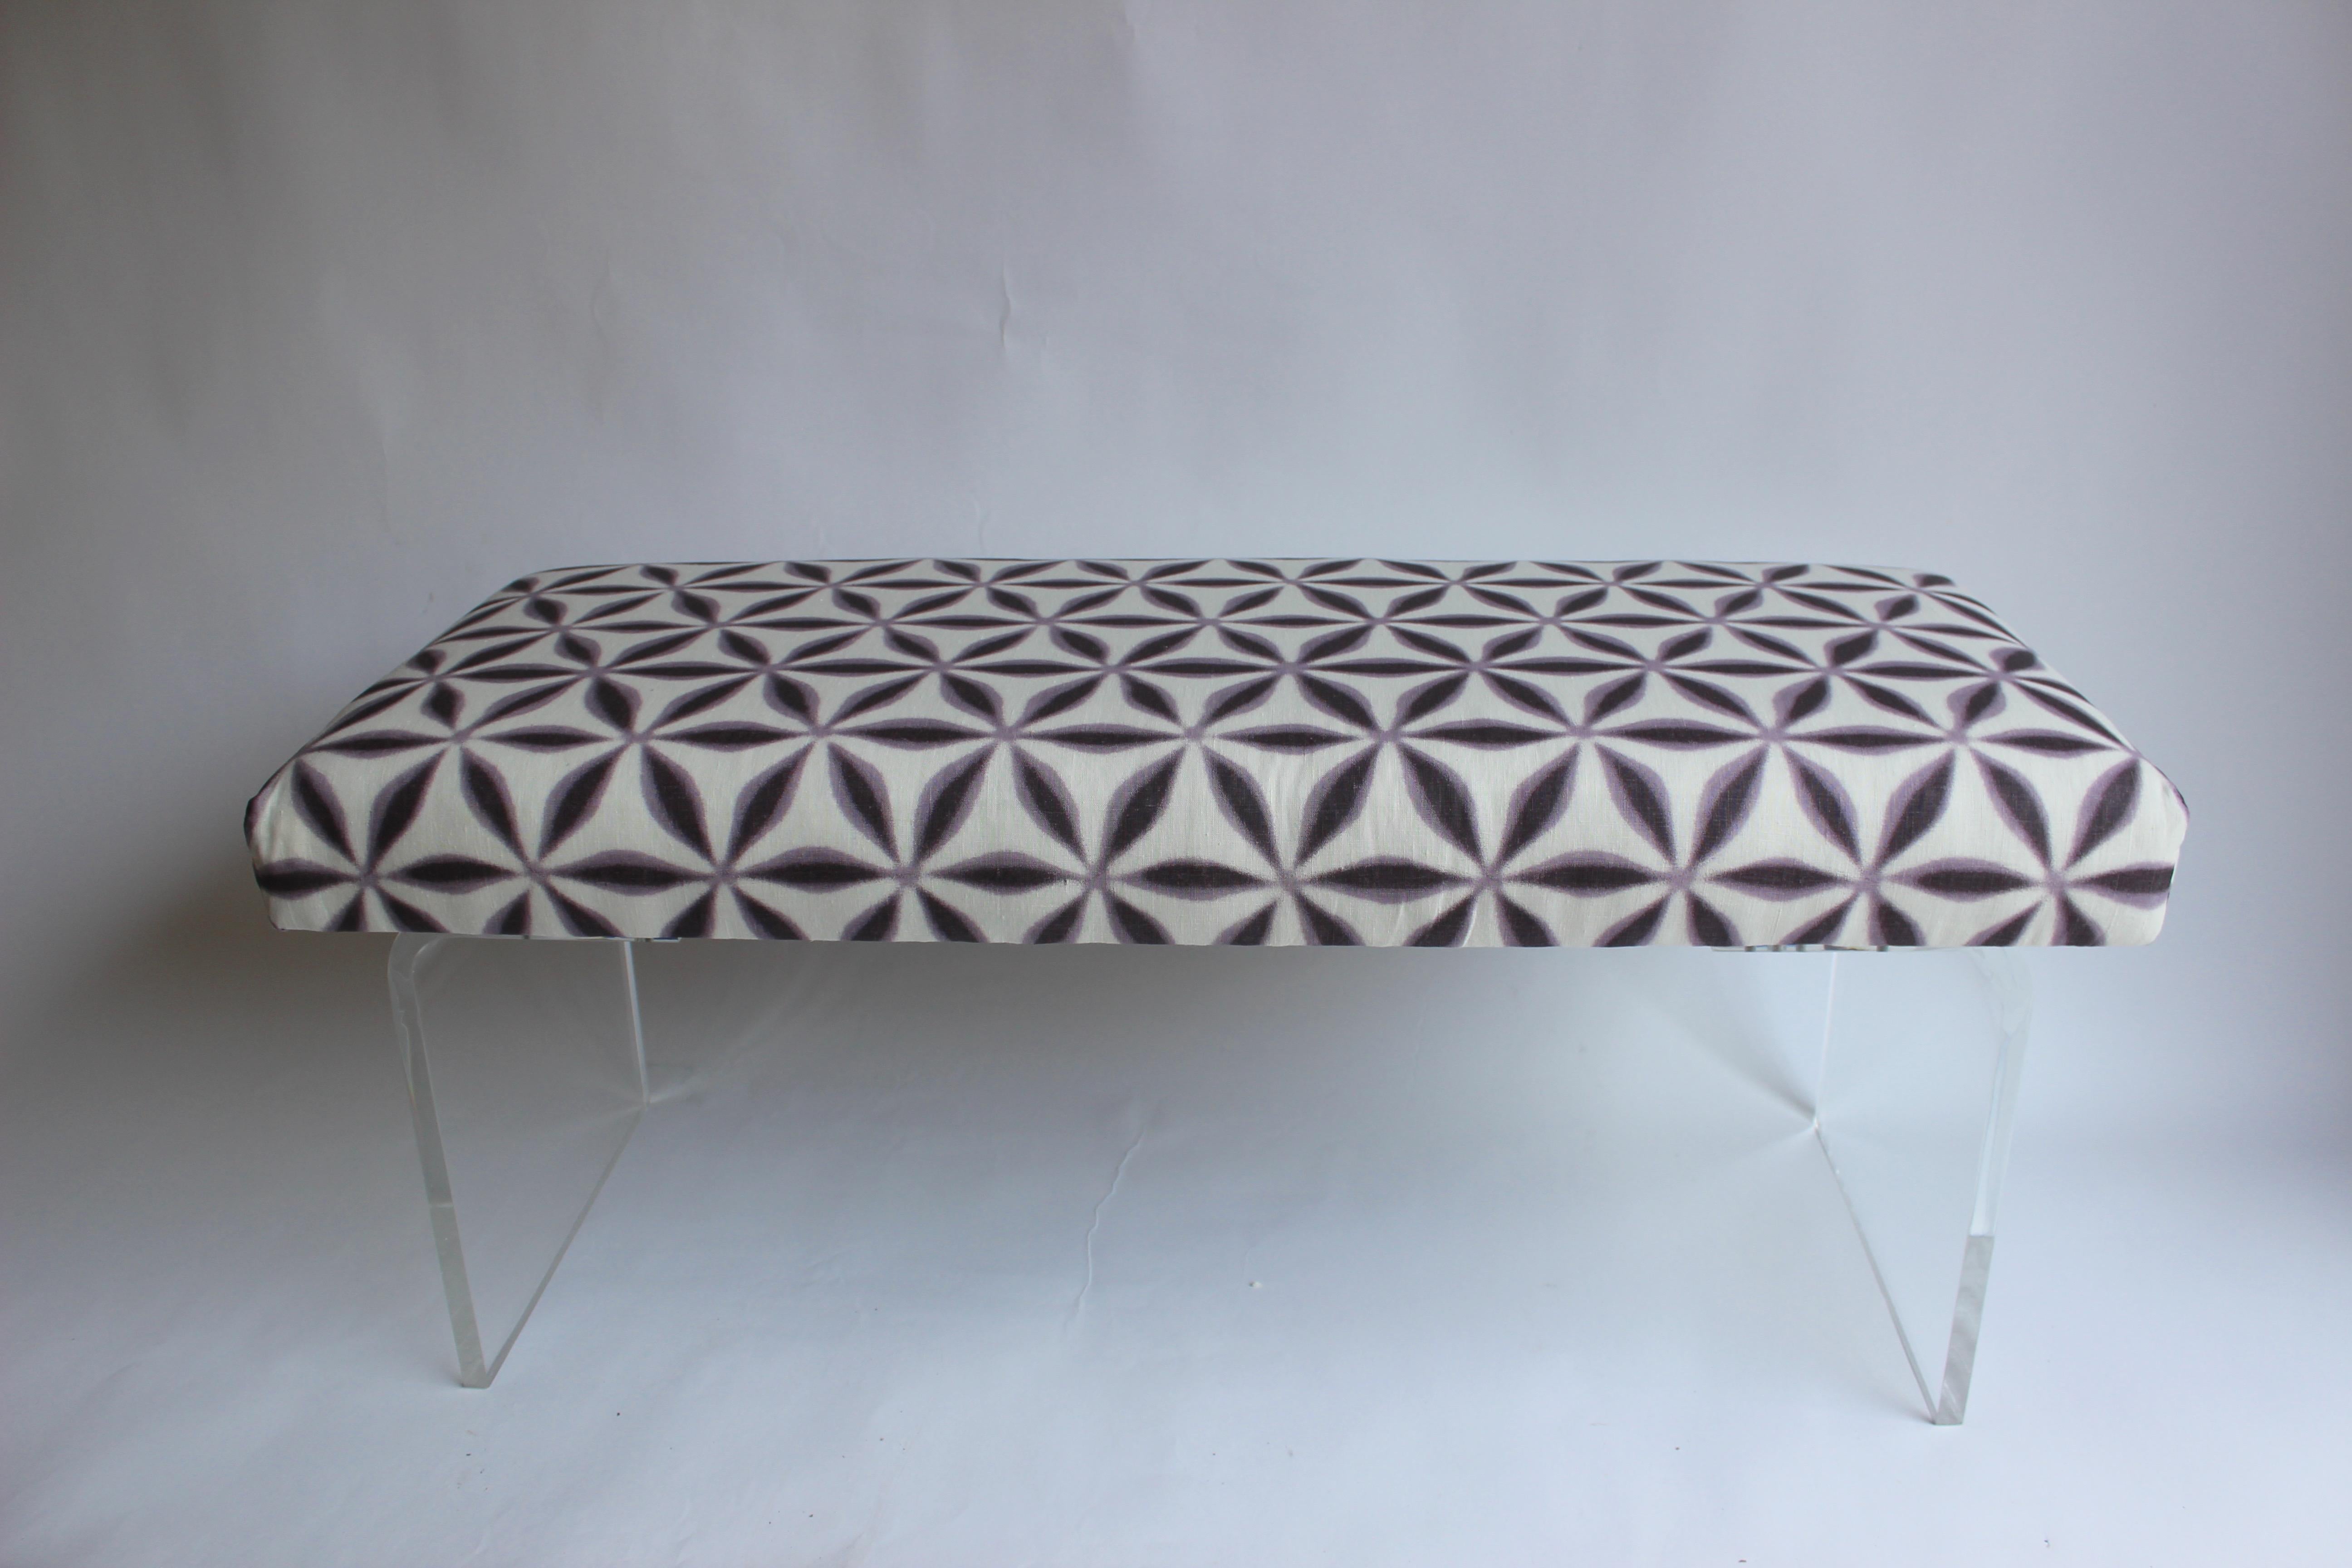 Newly upholstered bench with lucite waterfall legs......fabric is a printed linen from Michael Smith.